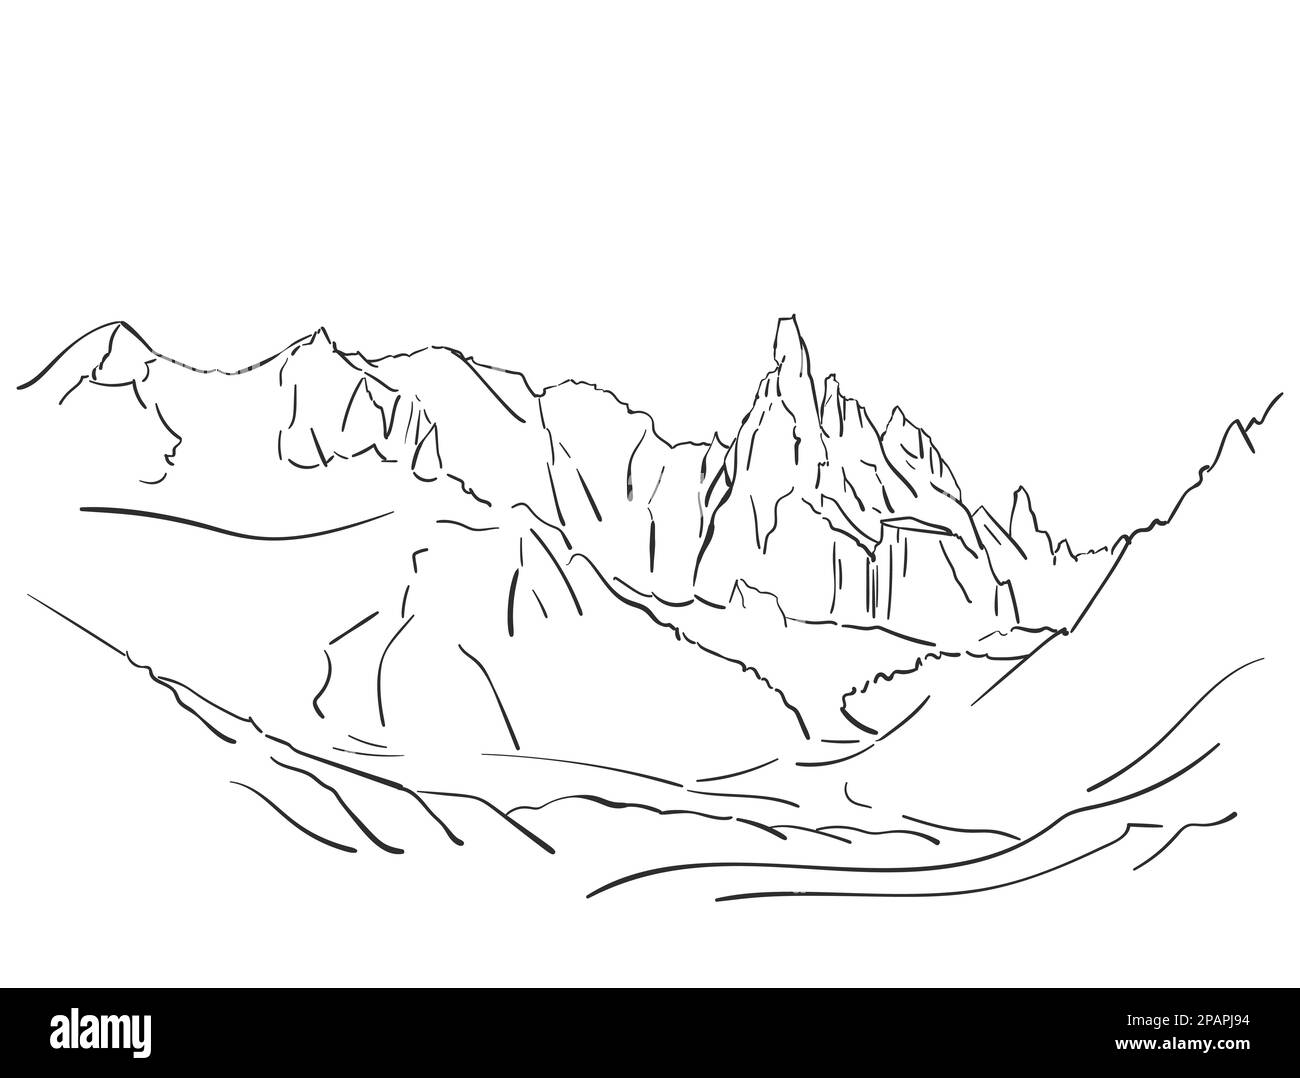 Linear sketch of Cerro Torre mountain massif in Patagonia, Hand drawn vector illustration Stock Vector